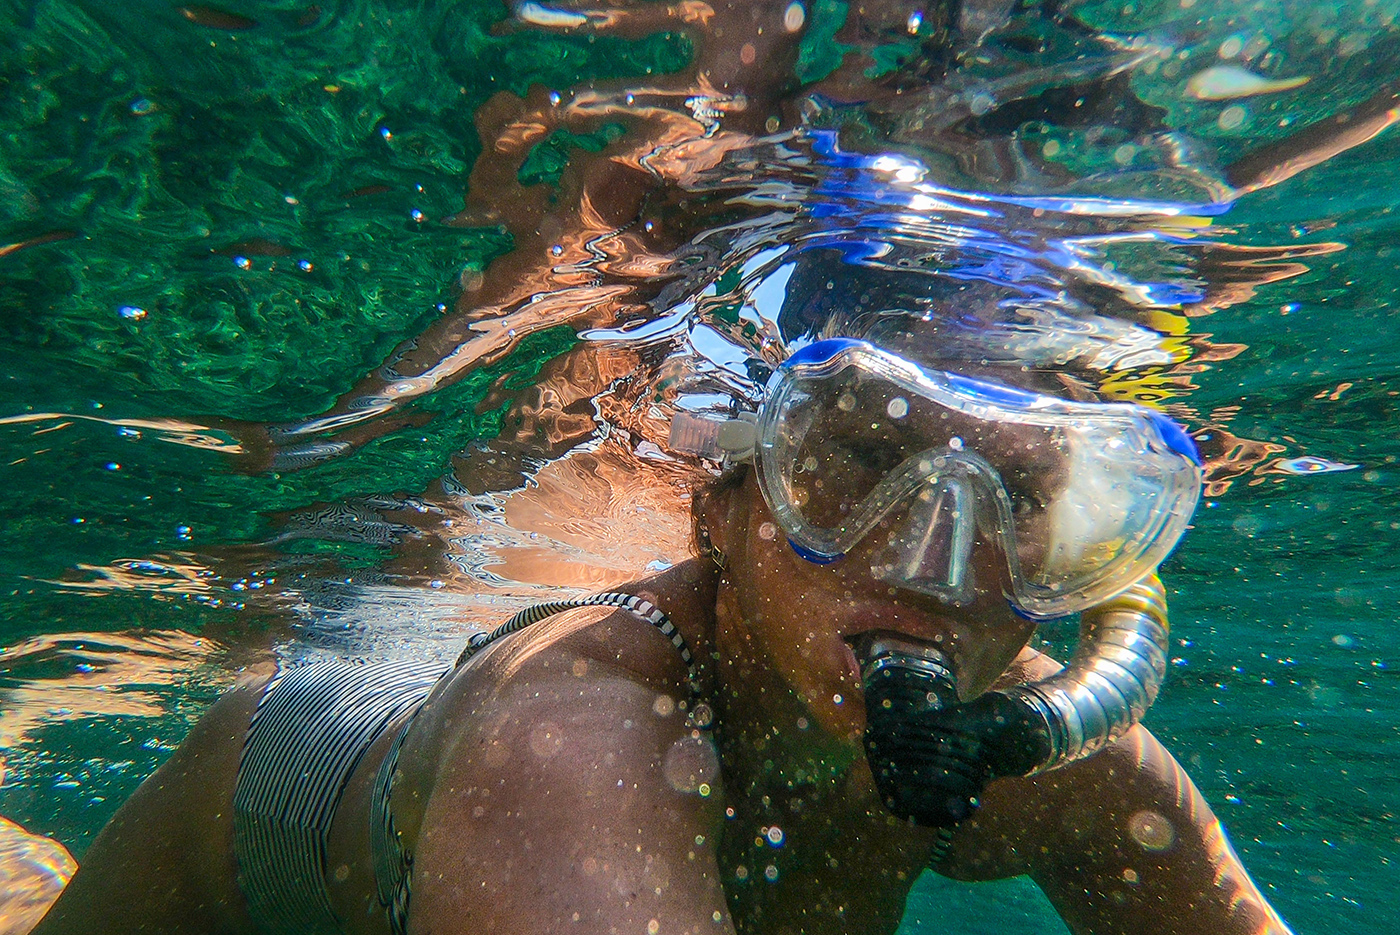 A snorkeler with mask and snorkel on for the article about snorkeling in Hawaii.